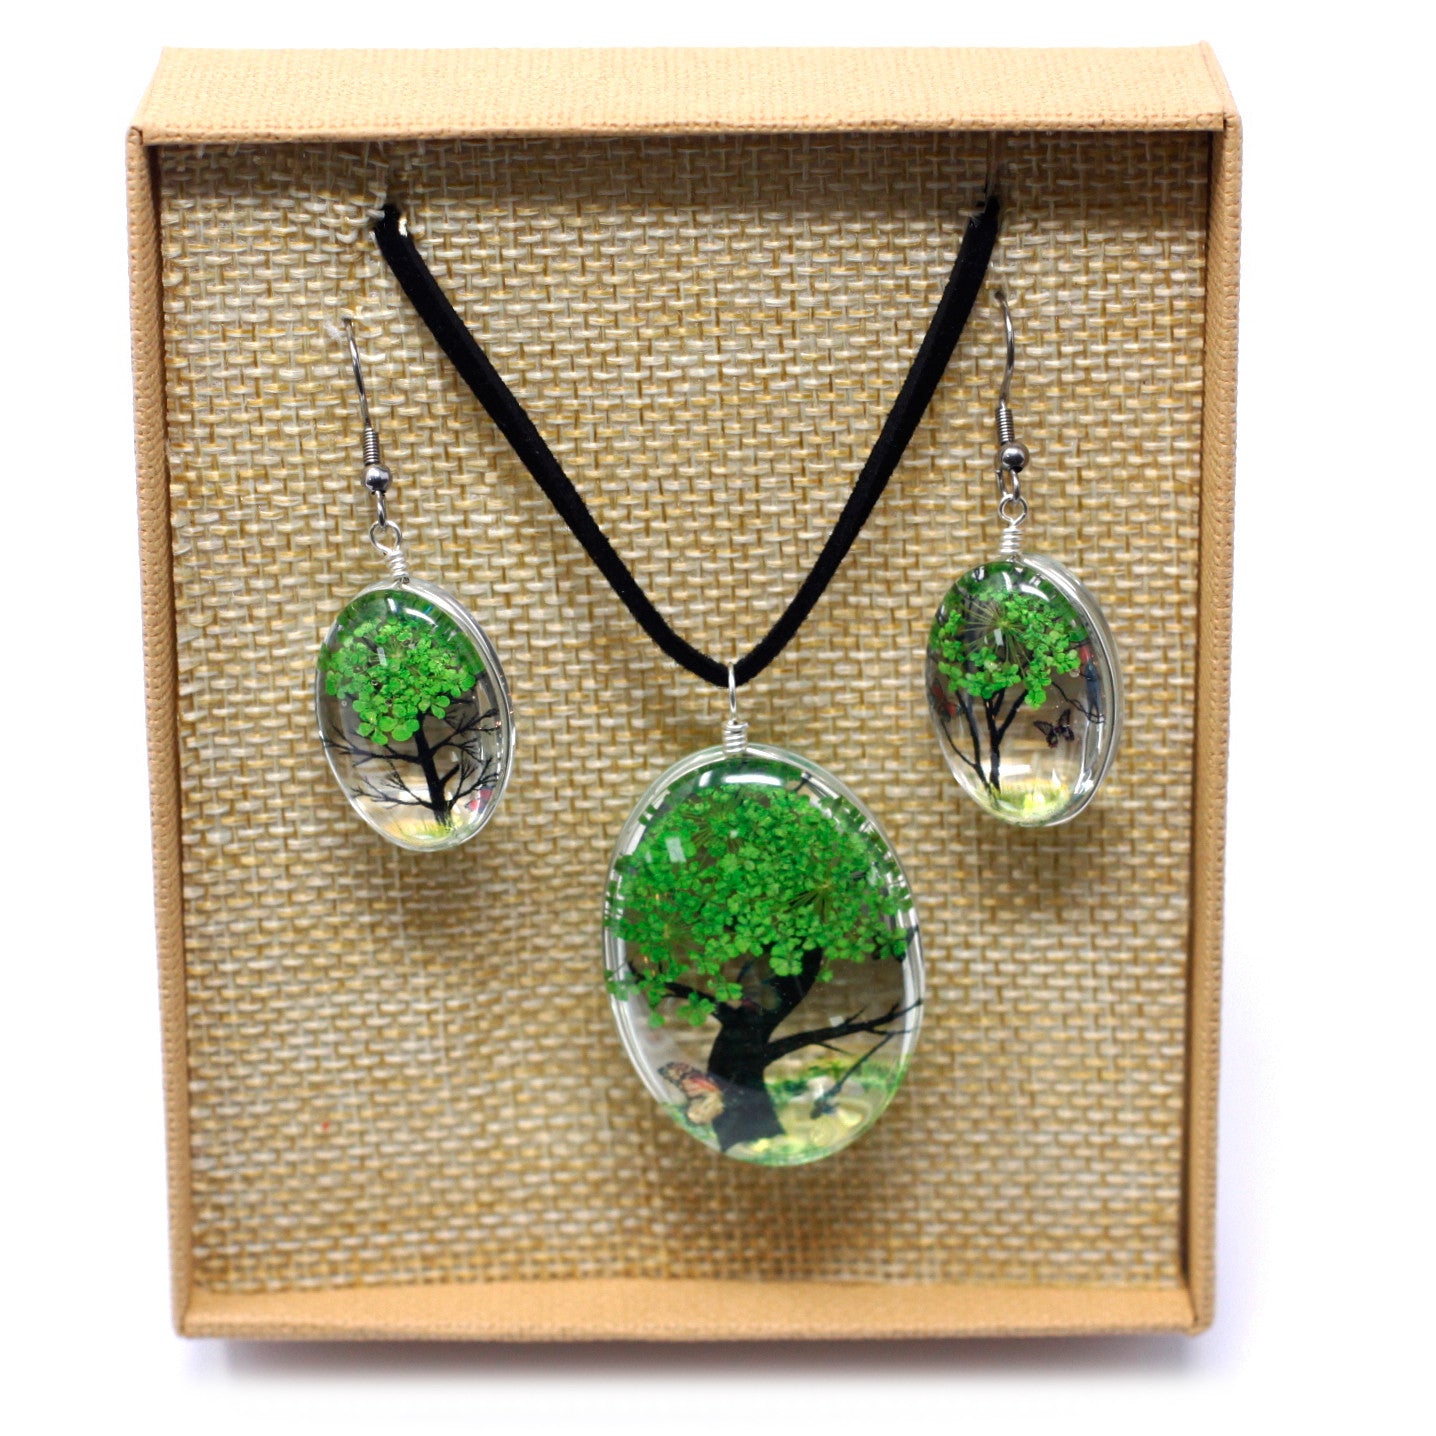 Pressed Flowers Necklaces - Tree of Life set - Green